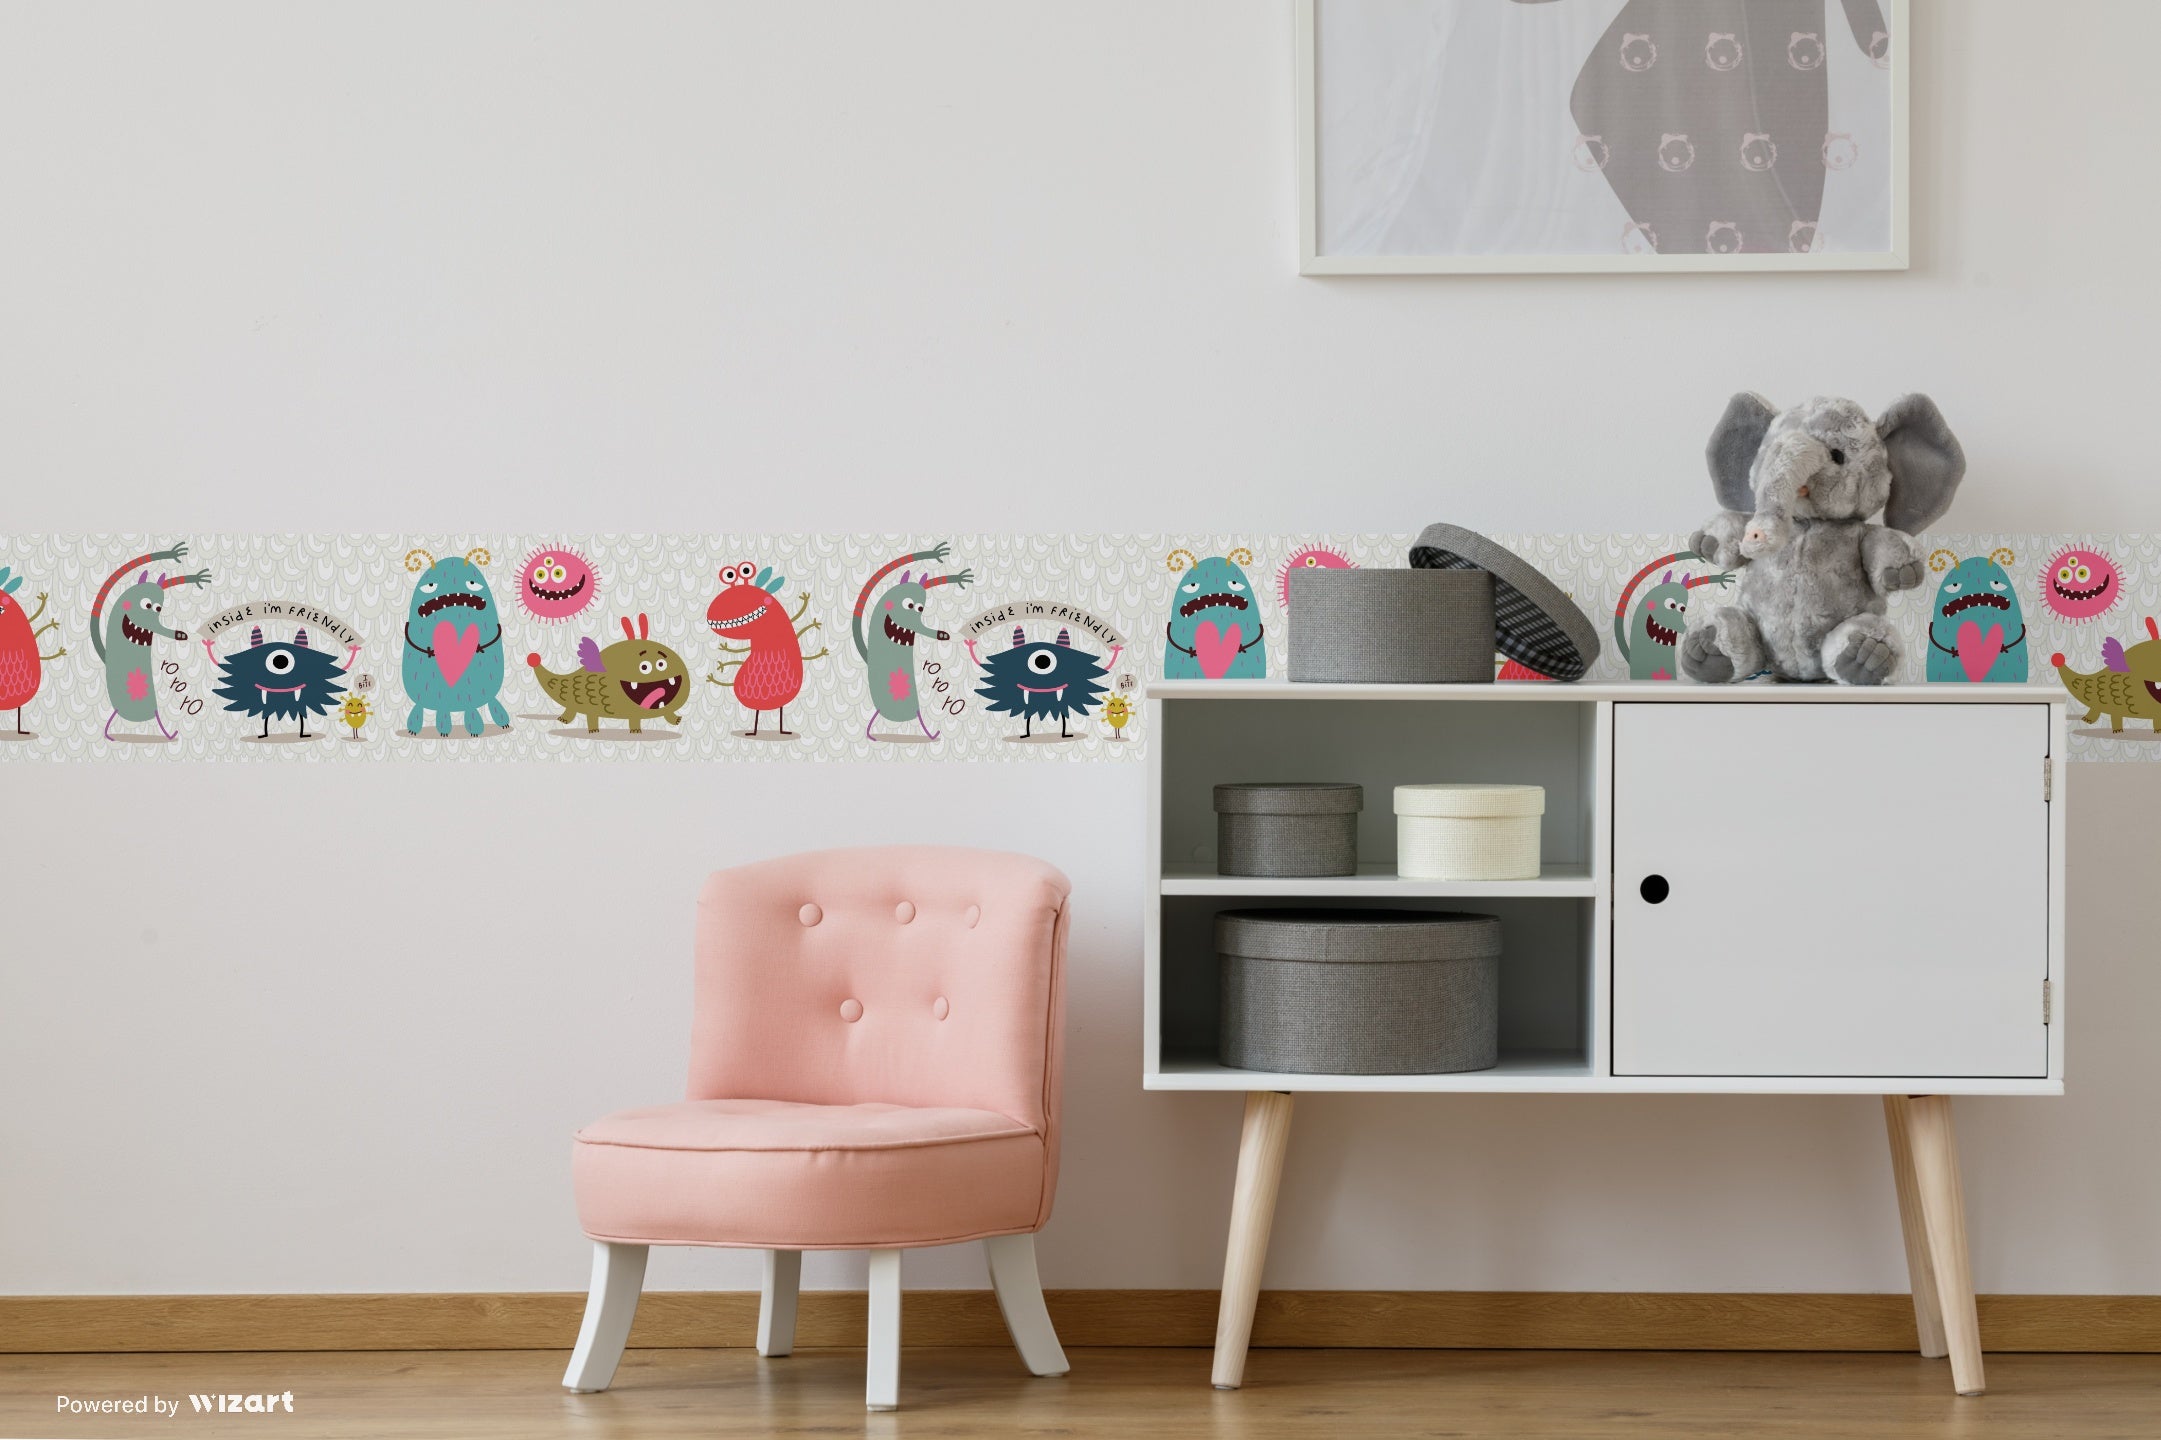 GB90131g8 Cuddly Monsters Peel and Stick Wallpaper Border 8in Height x 18ft Long, White Gray Blue Pink